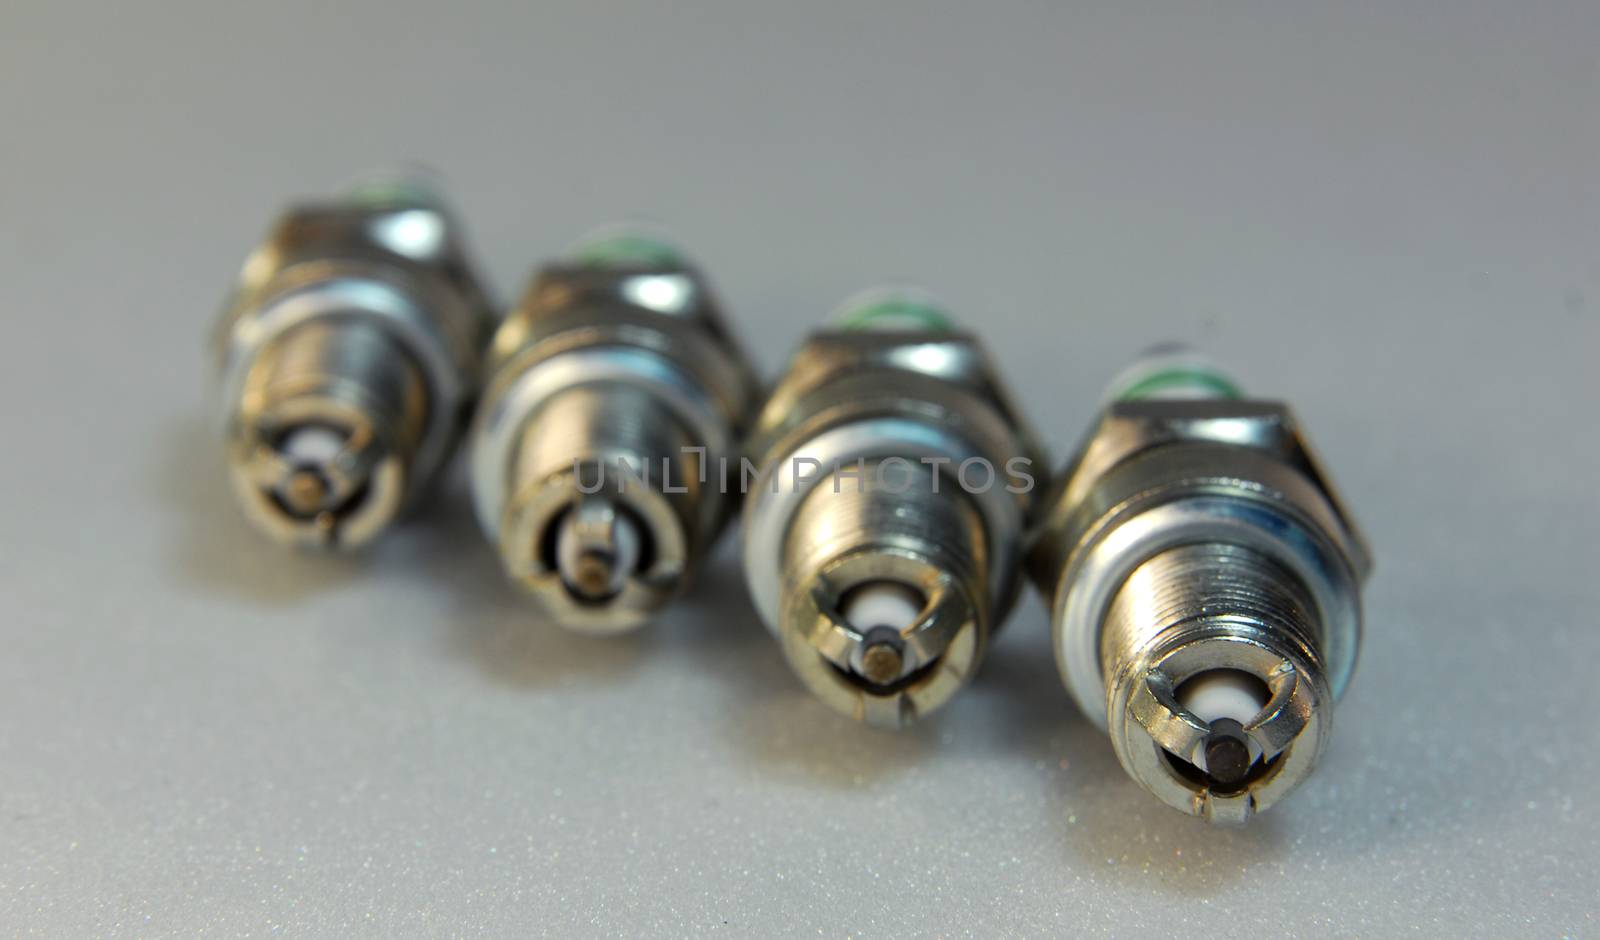 Set of spark plugs by aselsa